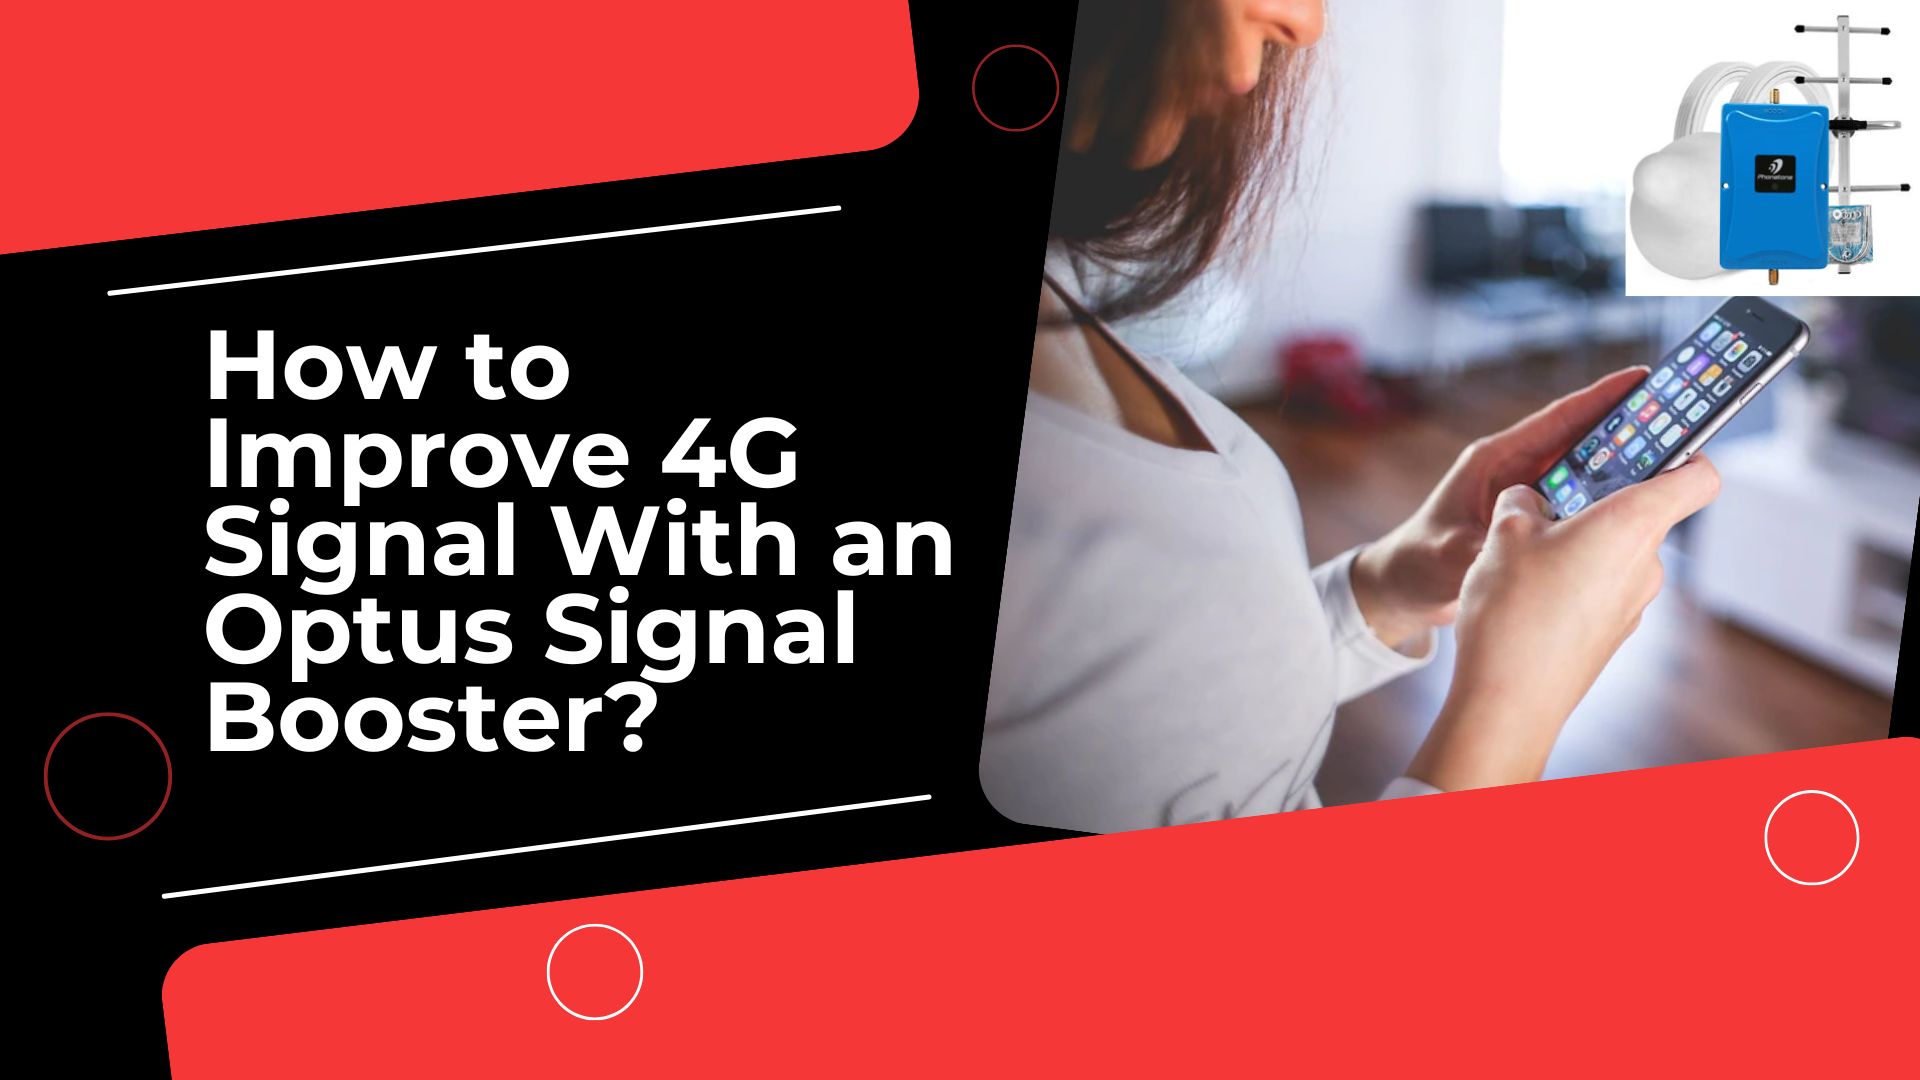 How to Improve 4G Signal With an Optus Signal Booster?